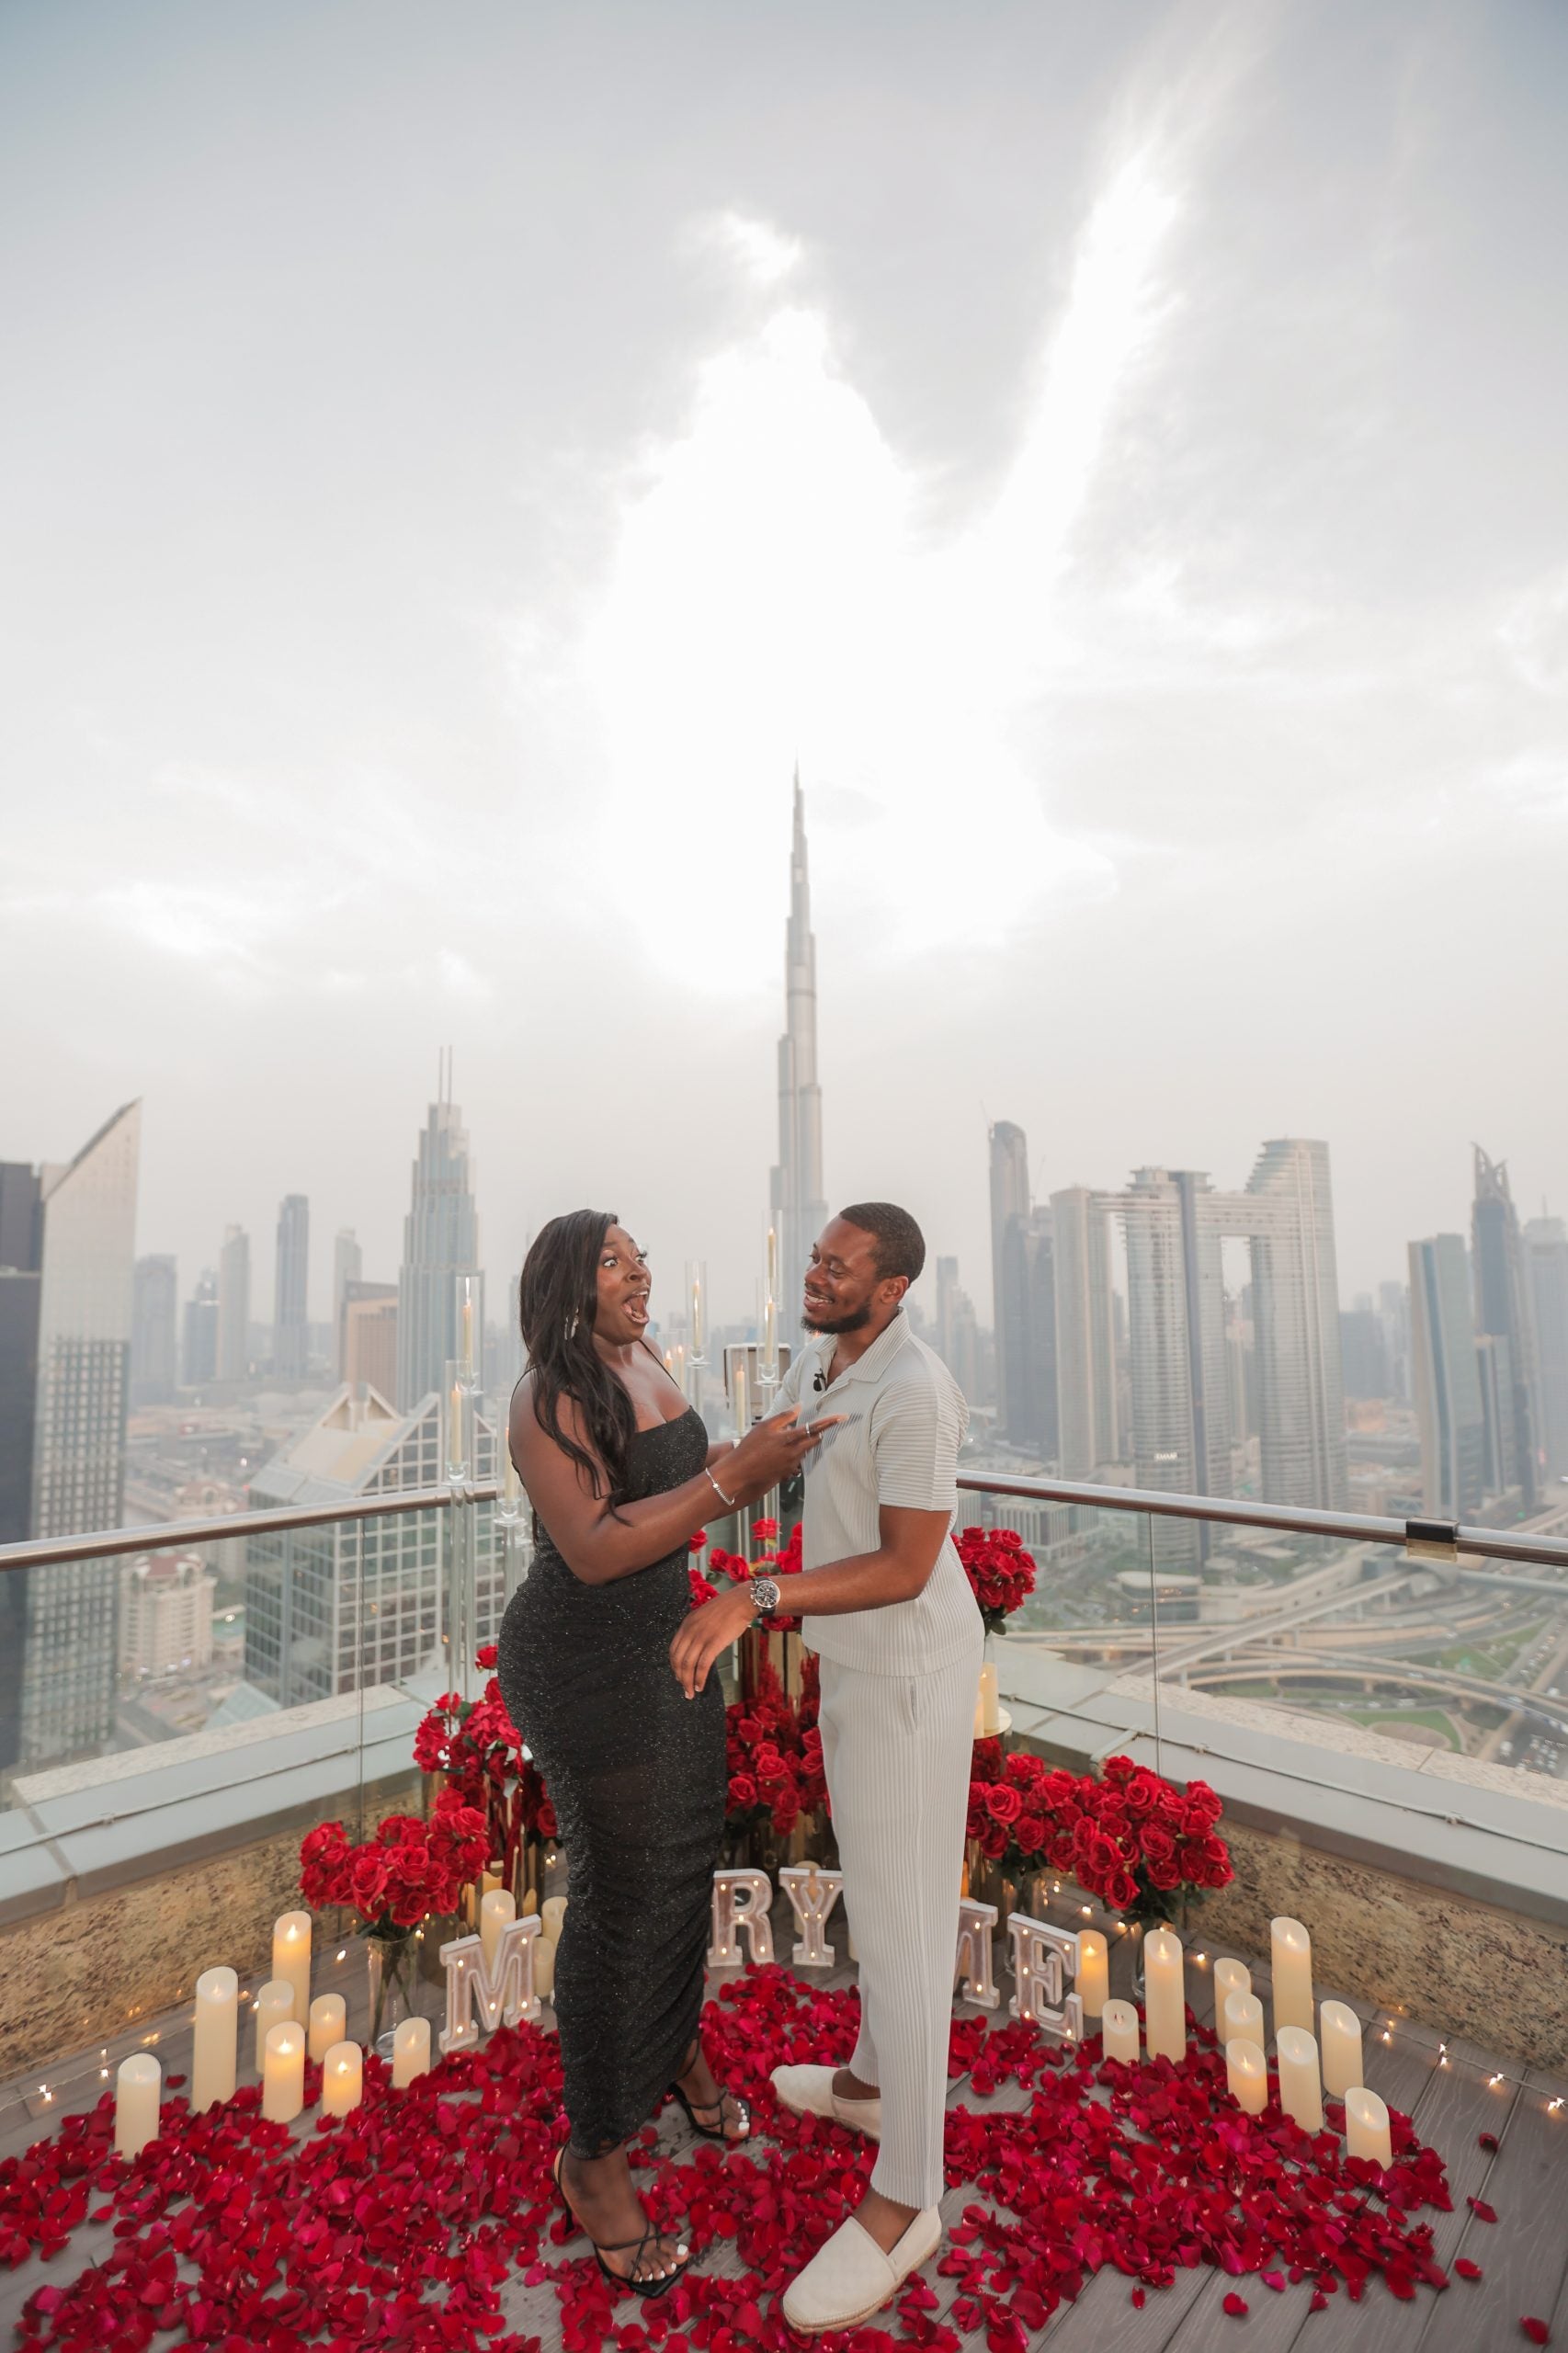 This Bride’s Destination Wedding In Dubai Was Canceled 48 Hours Before It Was Set To Begin